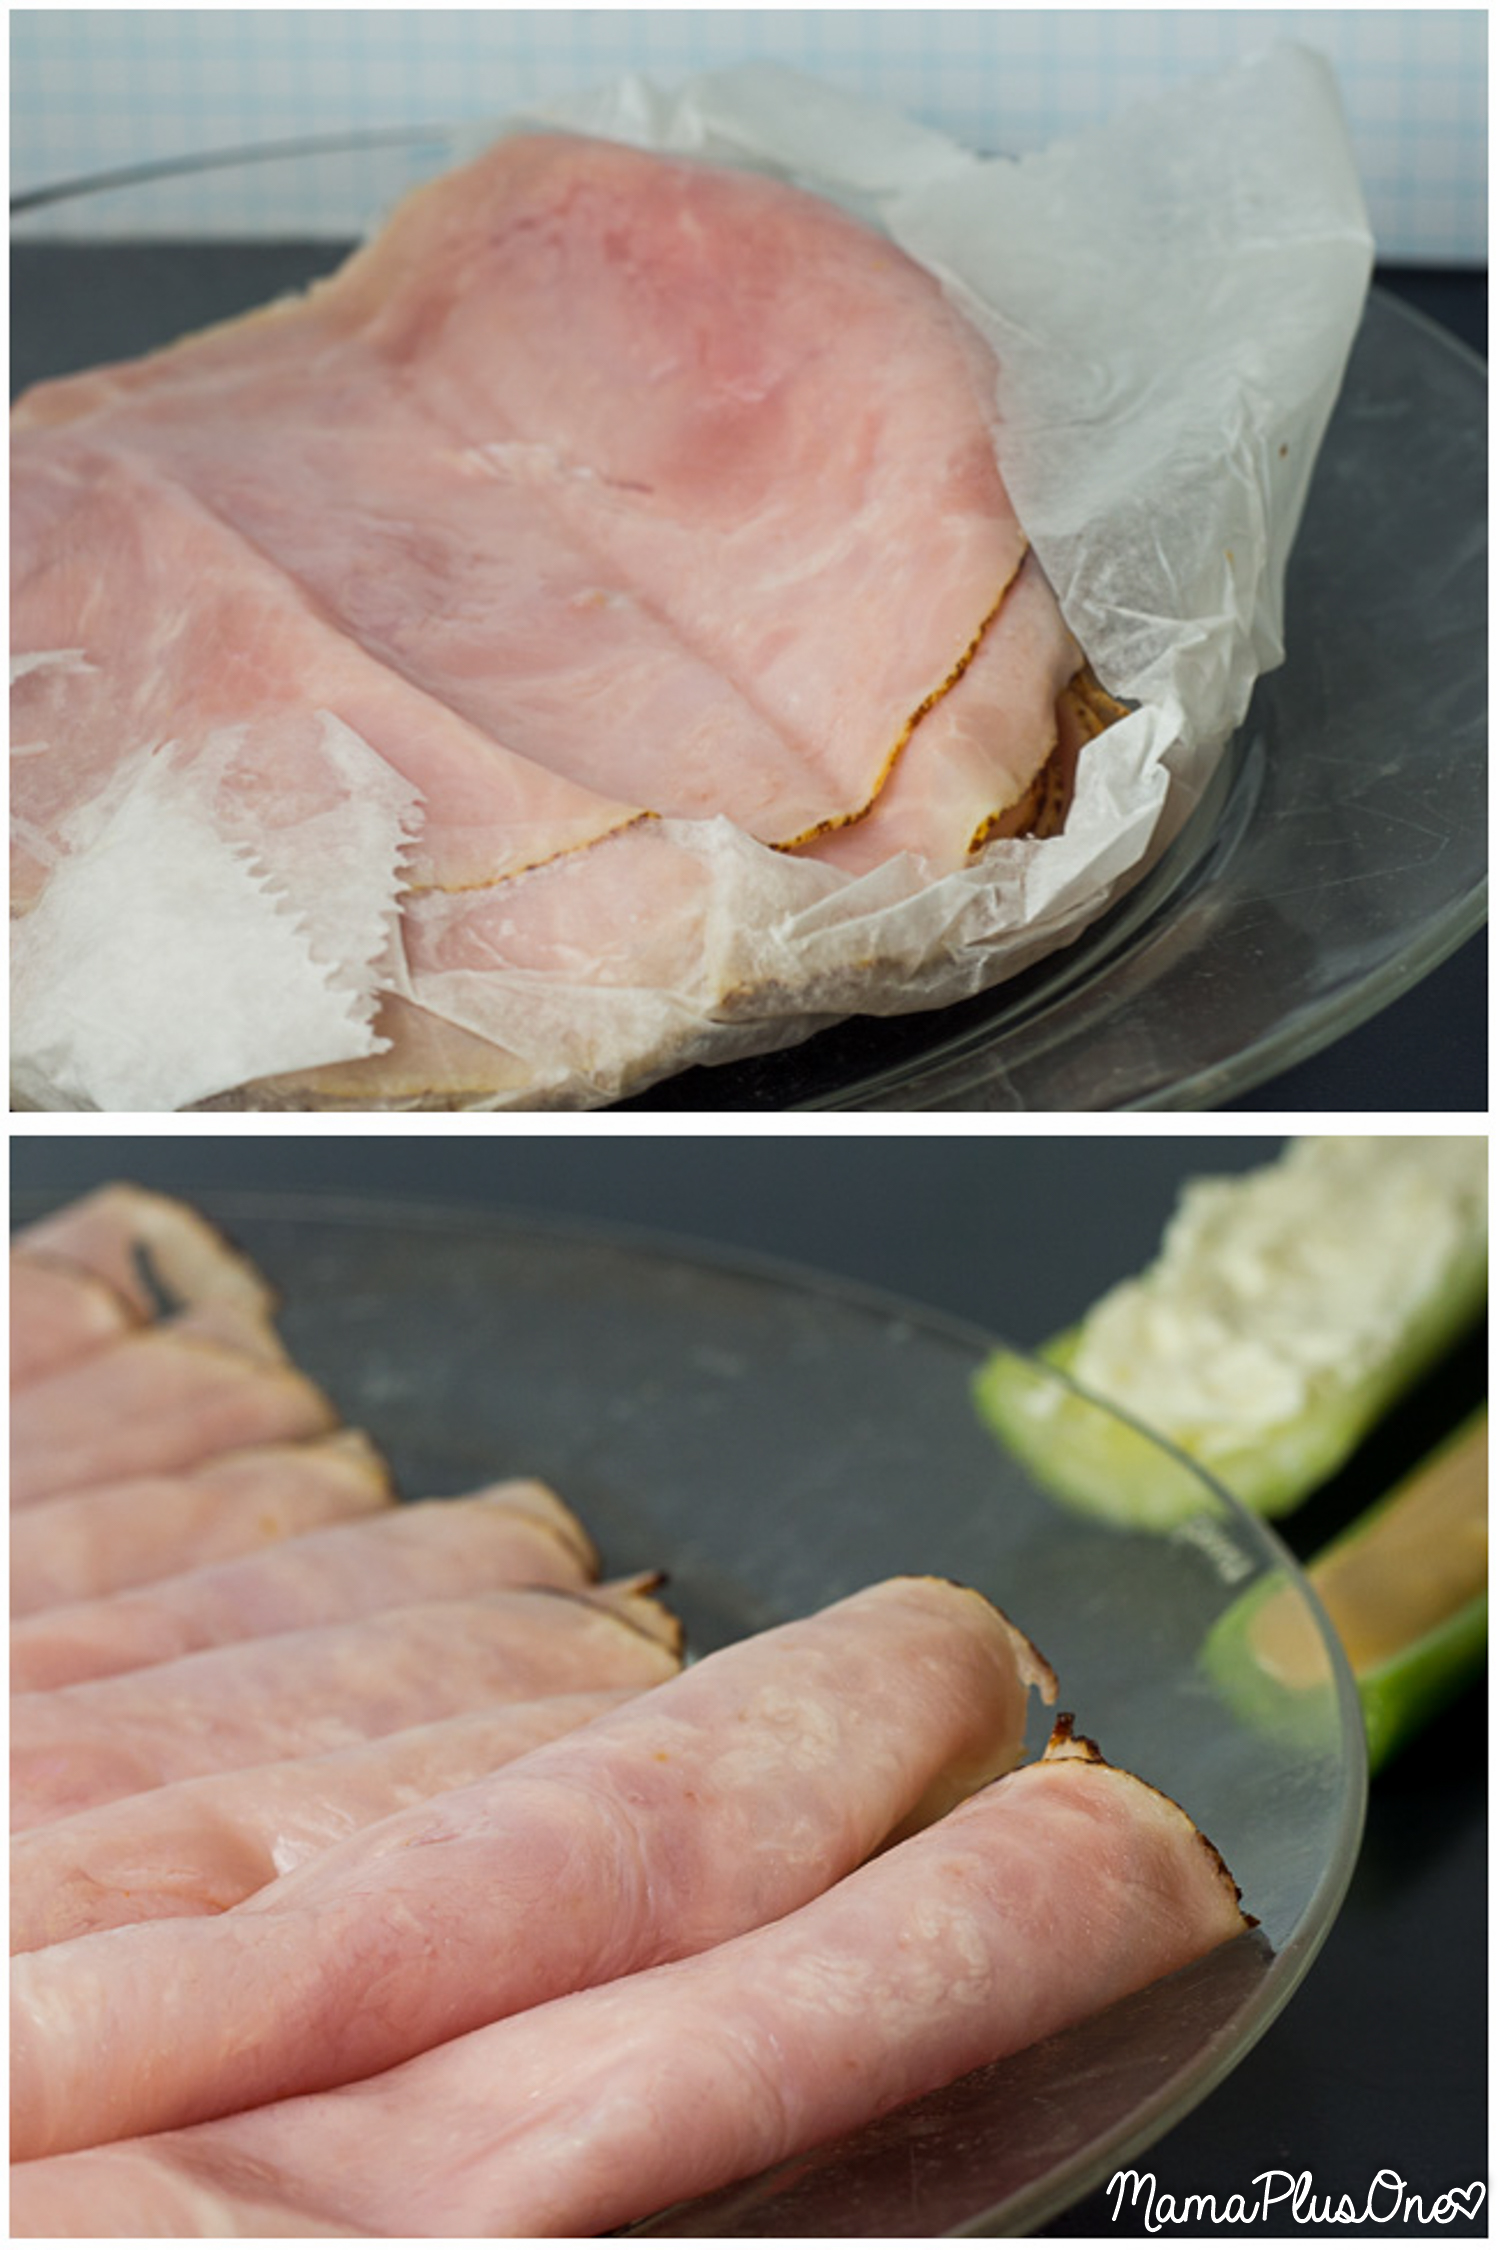 If you love easy after school snacks for your family, you'll love this after school snack recipe for Ham on a Log! You've heard of ants on a log, but this is a twist on the classic. Simply make a delicious cream cheese spread, spread it on celery, and top with Eckrich Deli Meat ham! #EckrichFlavor #AskForEckrich